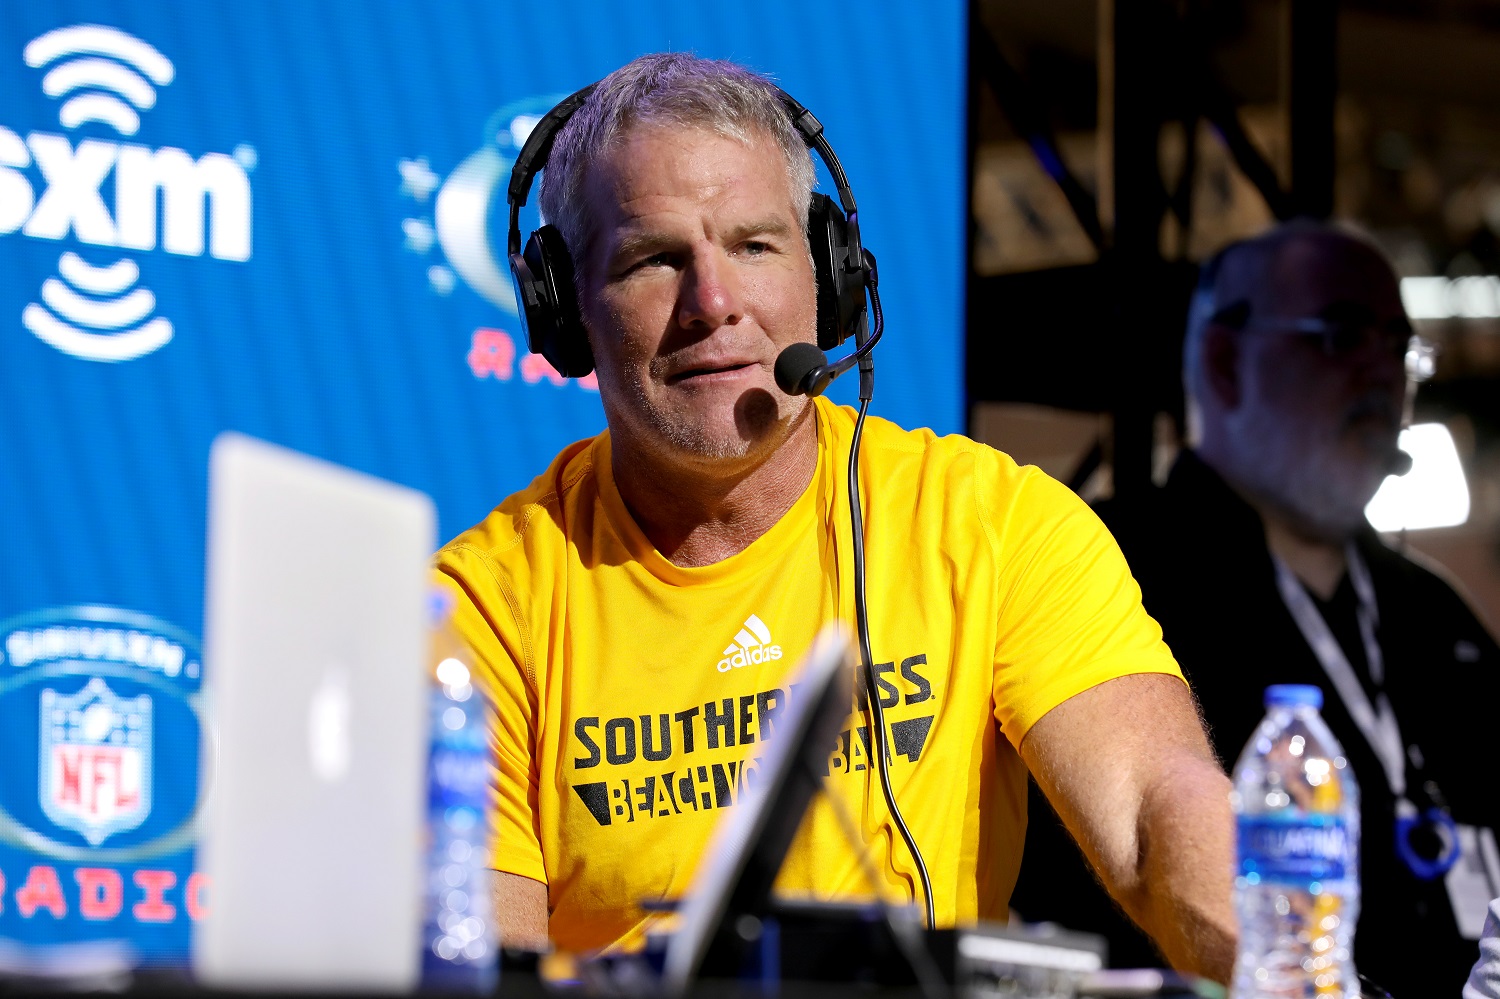 Former NFL player Brett Favre speaks during the lead-up to Super Bowl 54 in Miami, Florida.